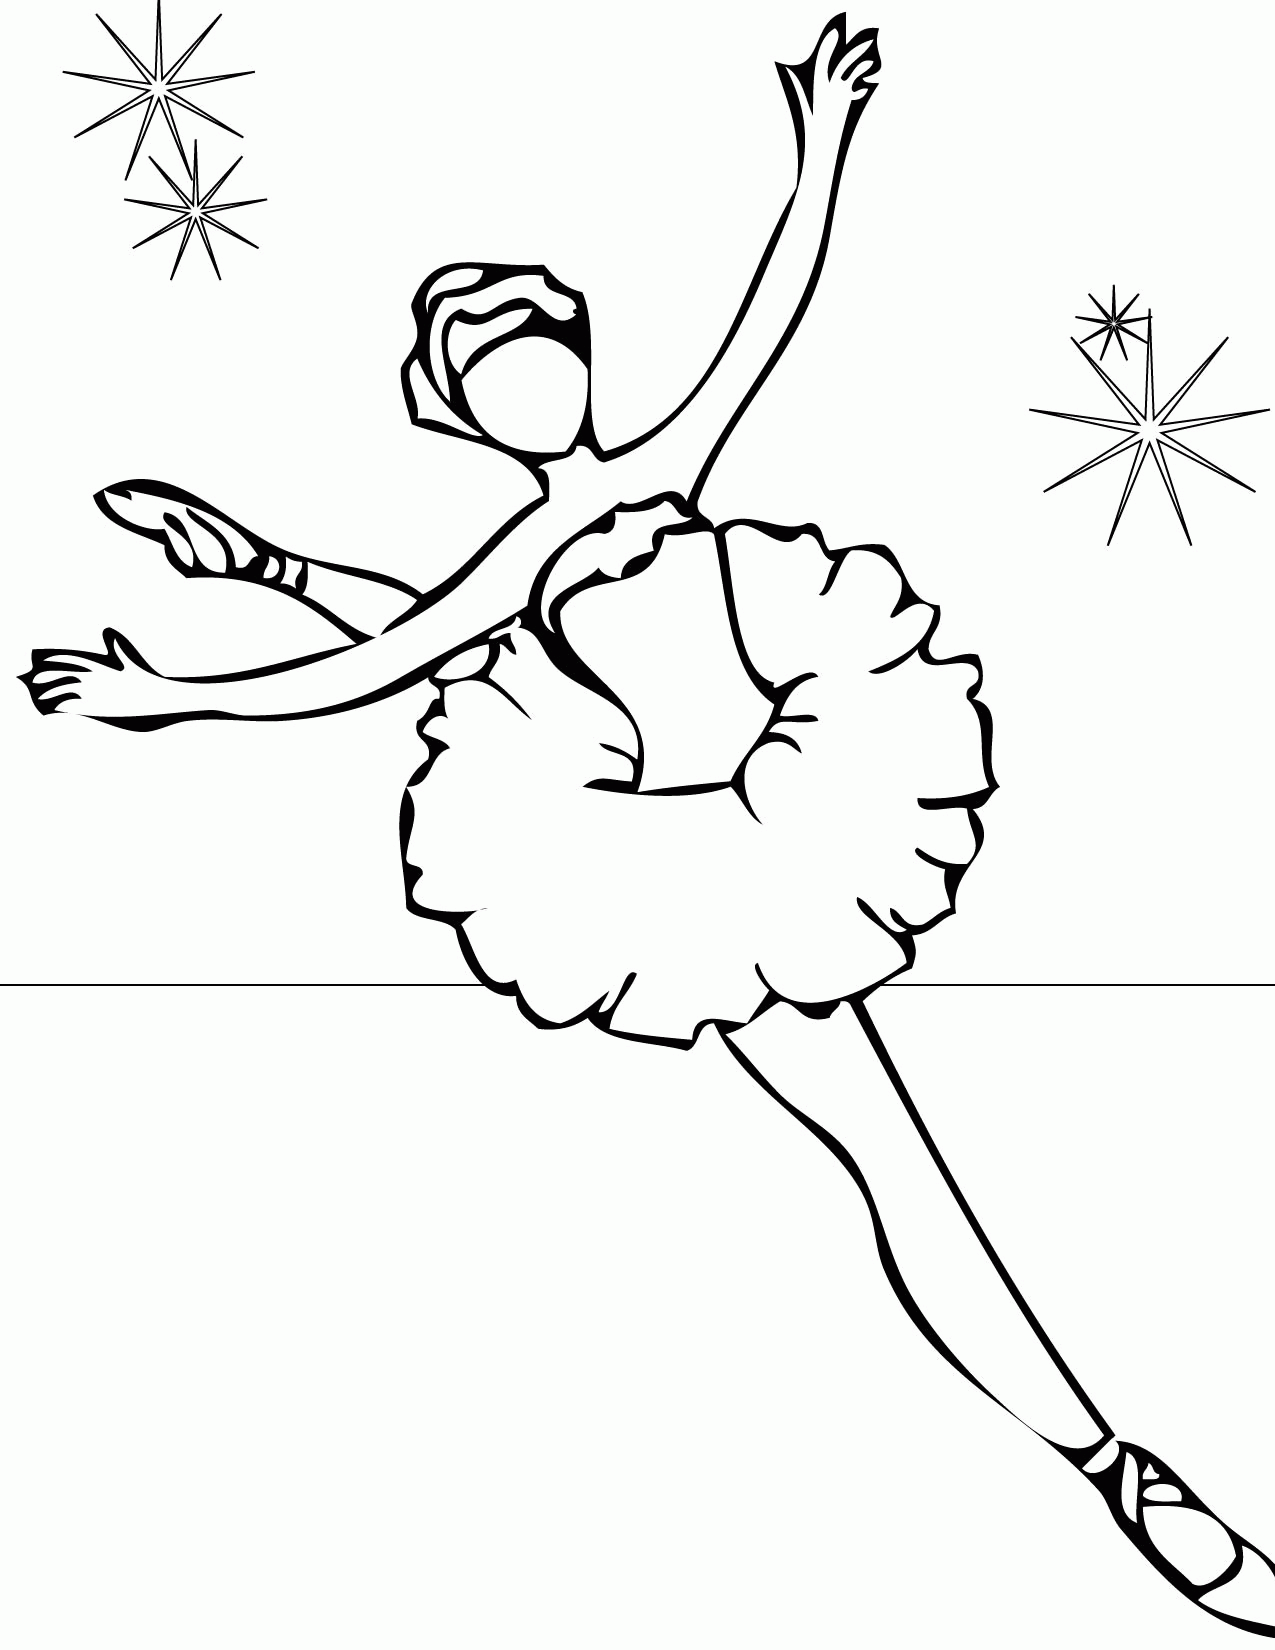 Acumen Ballerina Coloring Pages Coloring Pages For Kids - Widetheme